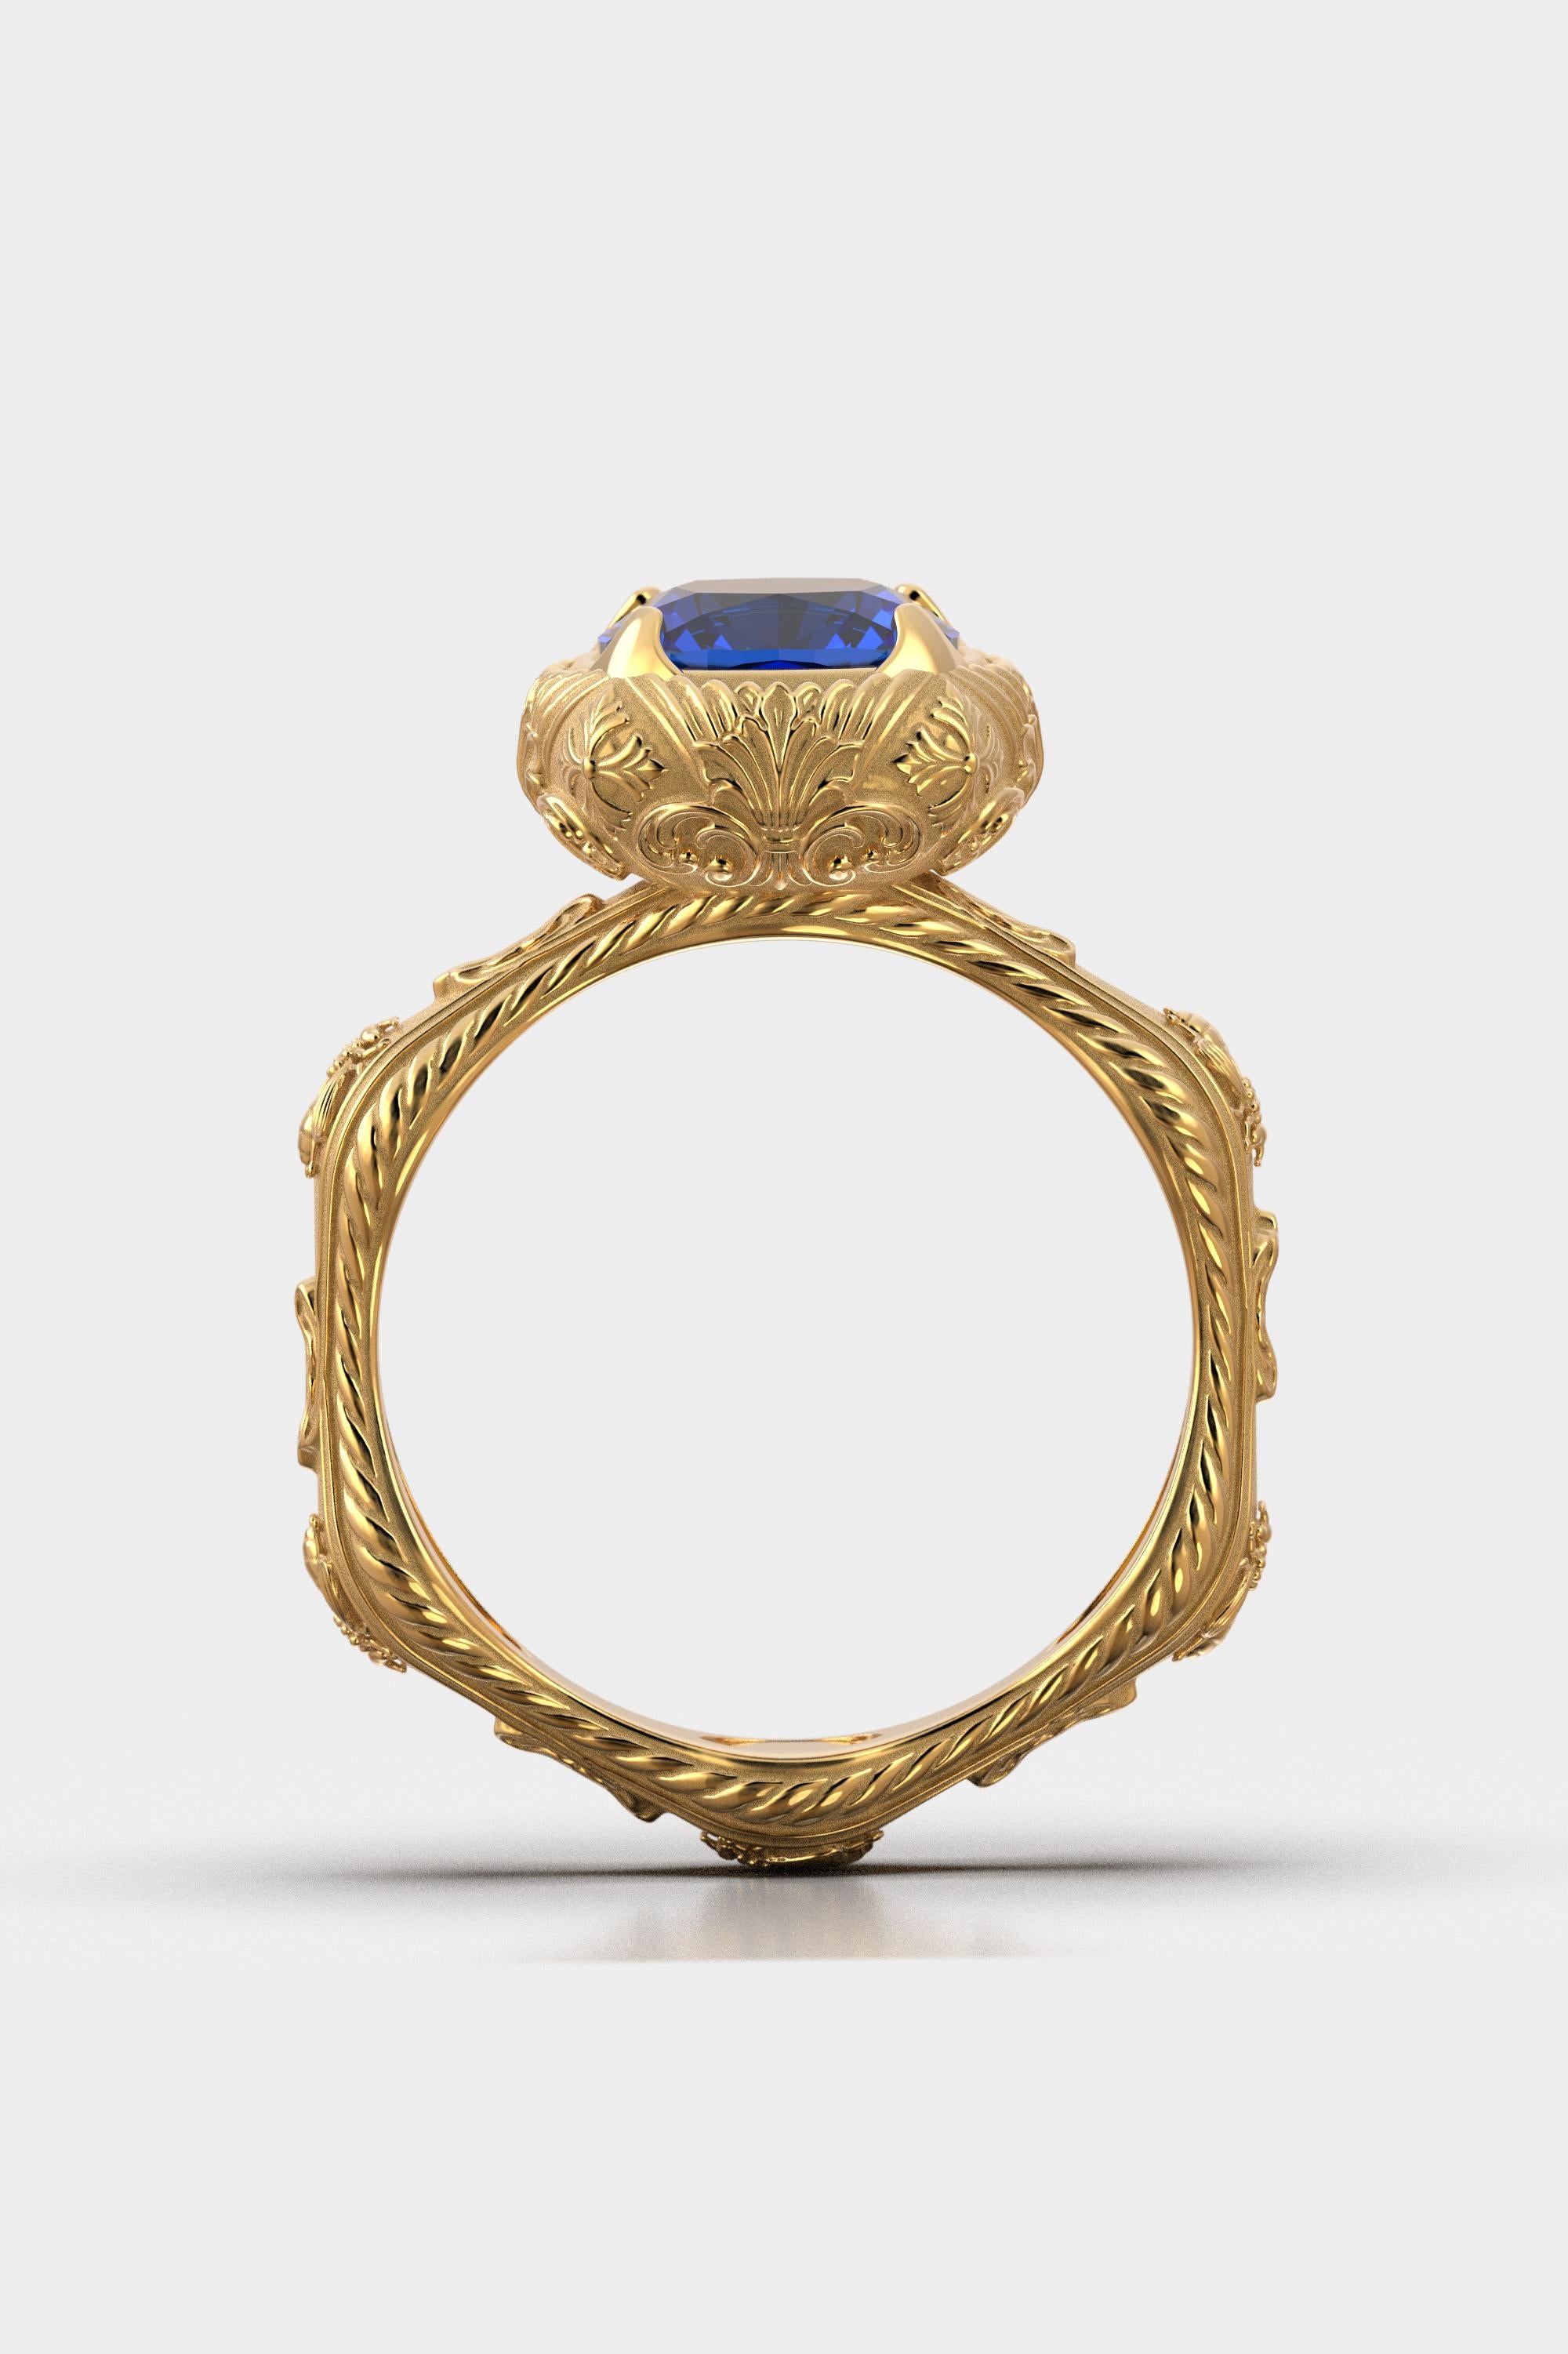 For Sale:  Tanzanite Ring Made In Italy by Oltremare Gioielli in 18k genuine gold 7